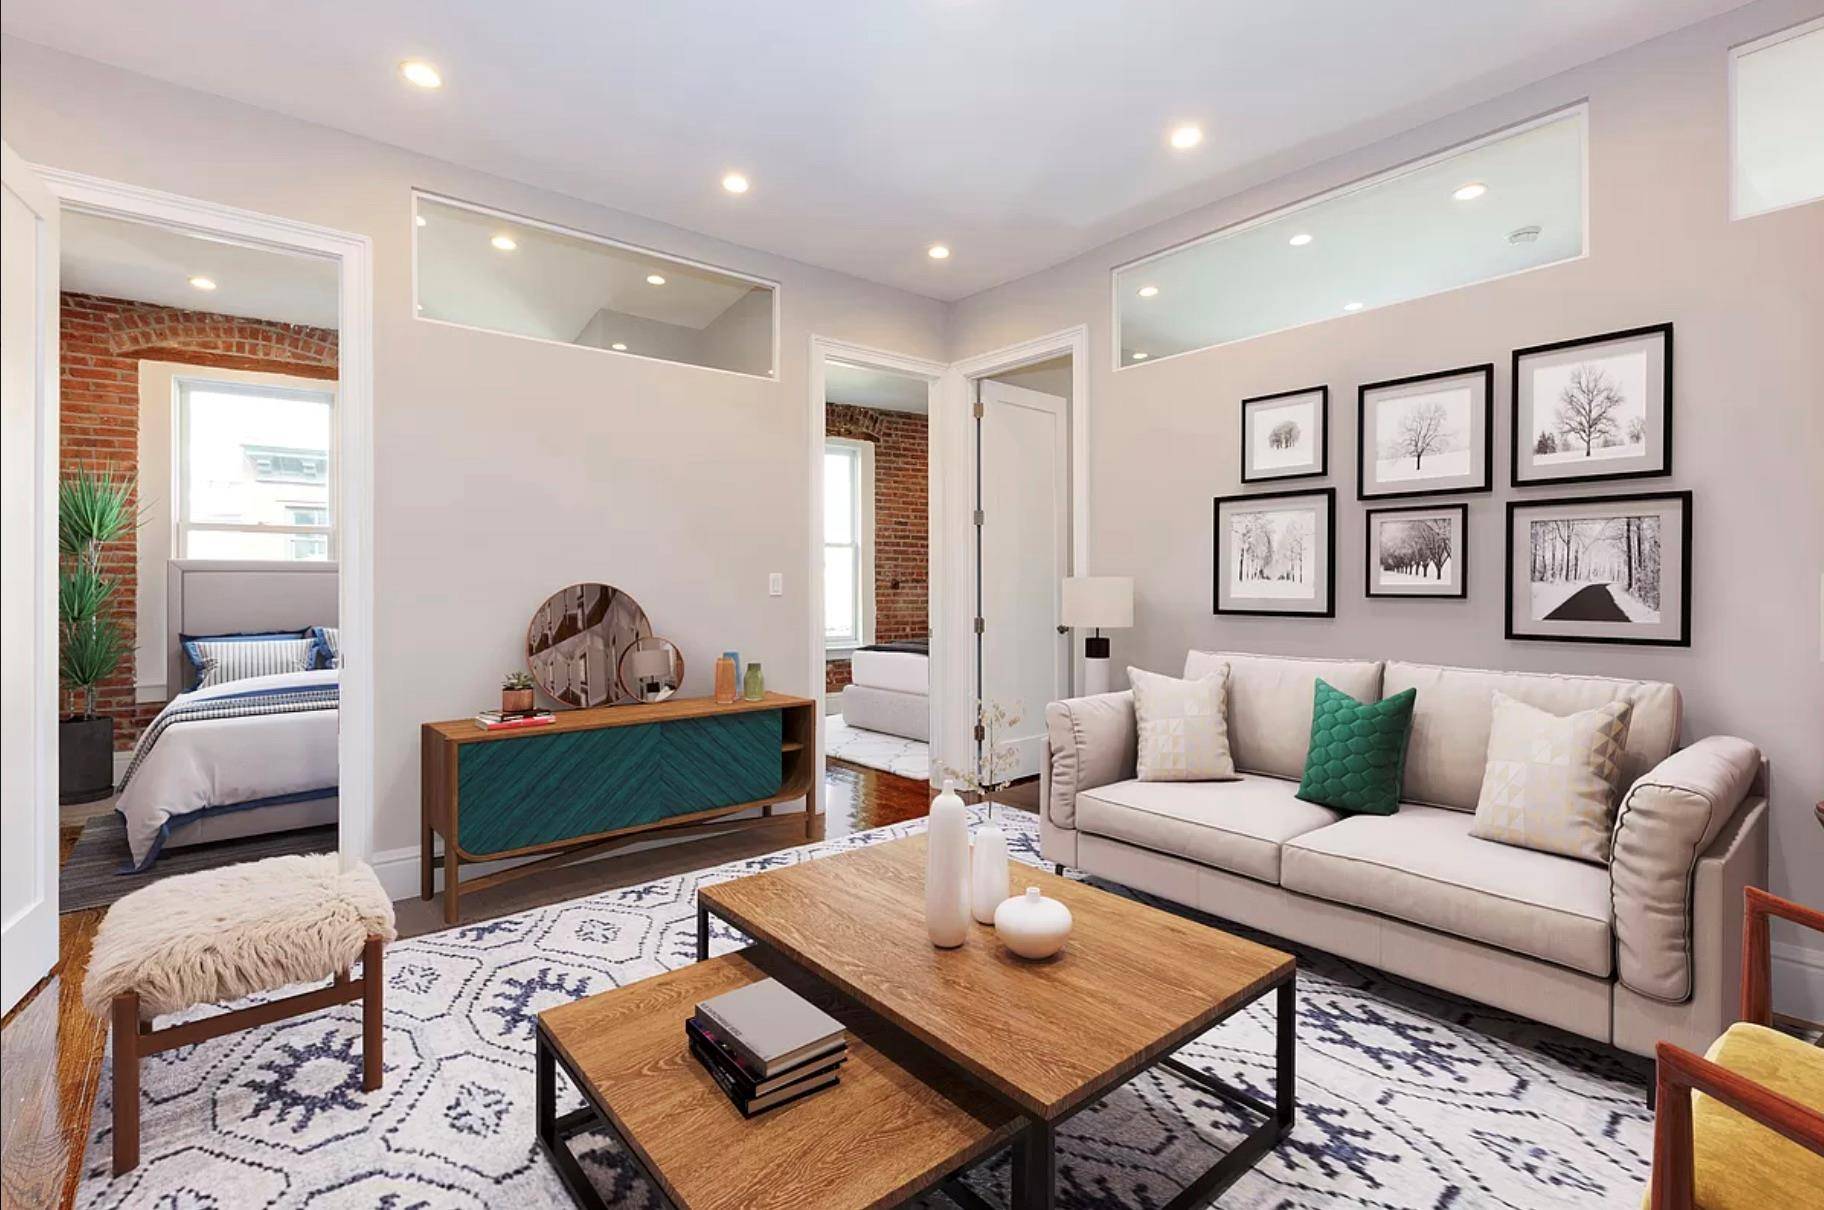 AVAILABLE JUNE 1OPEN HOUSE IS BY APPOINTMENTLAUNDRY IN BUILDINGThis immaculate and HUGE, 5 bedroom 2 bathroom apartment is located in the heart of theWest Village within close proximity to the ...